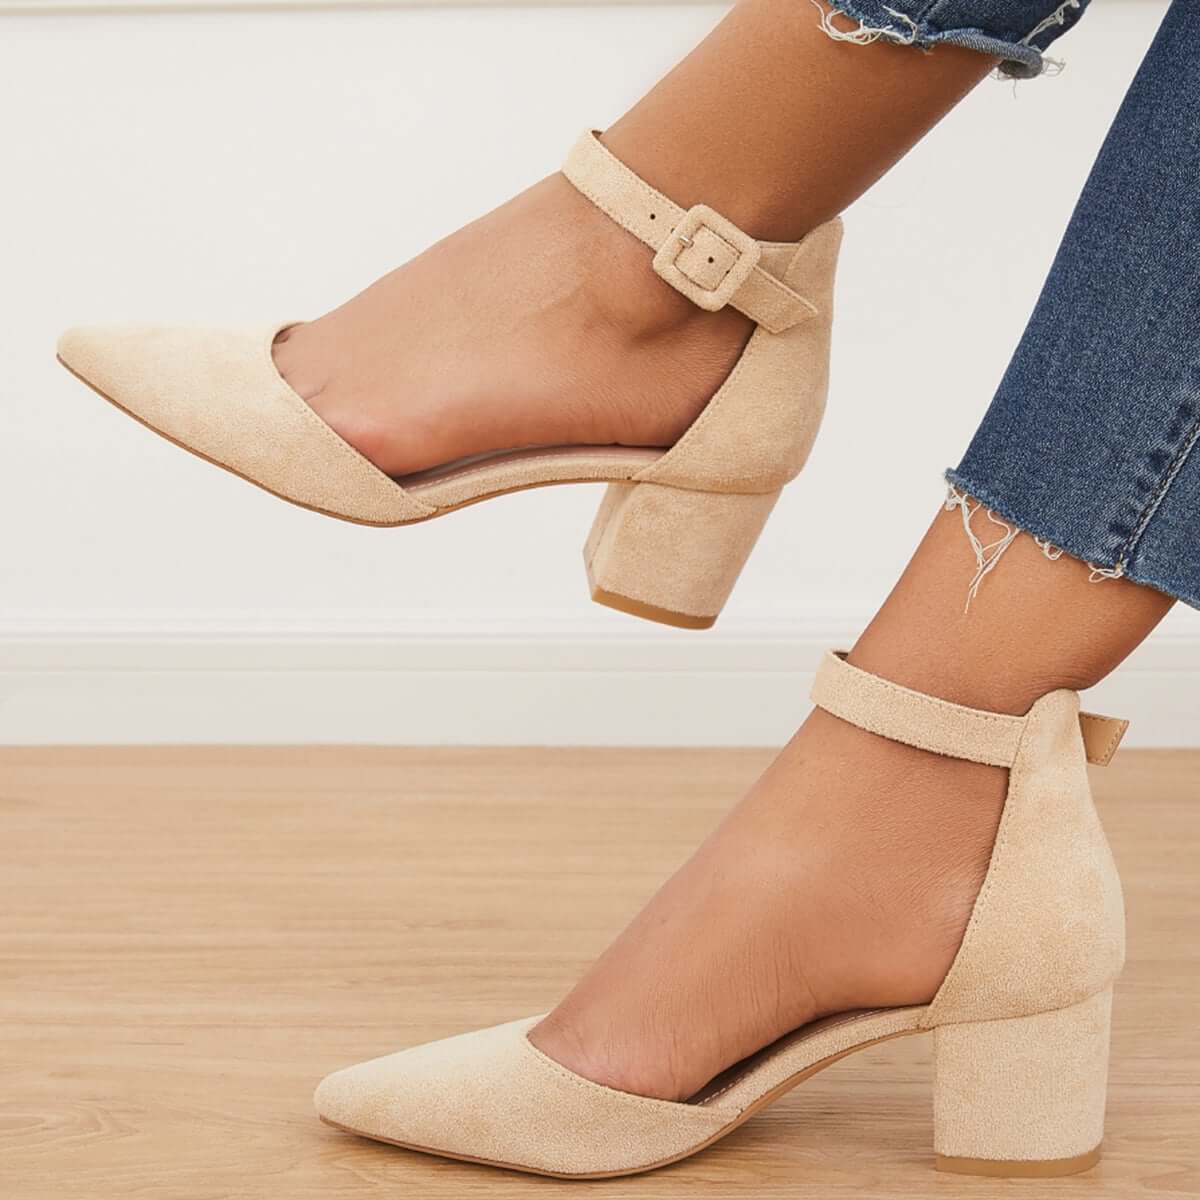 Low Chunky Block Heel Pumps Pointed Toe Ankle Strap Heels Pairmore